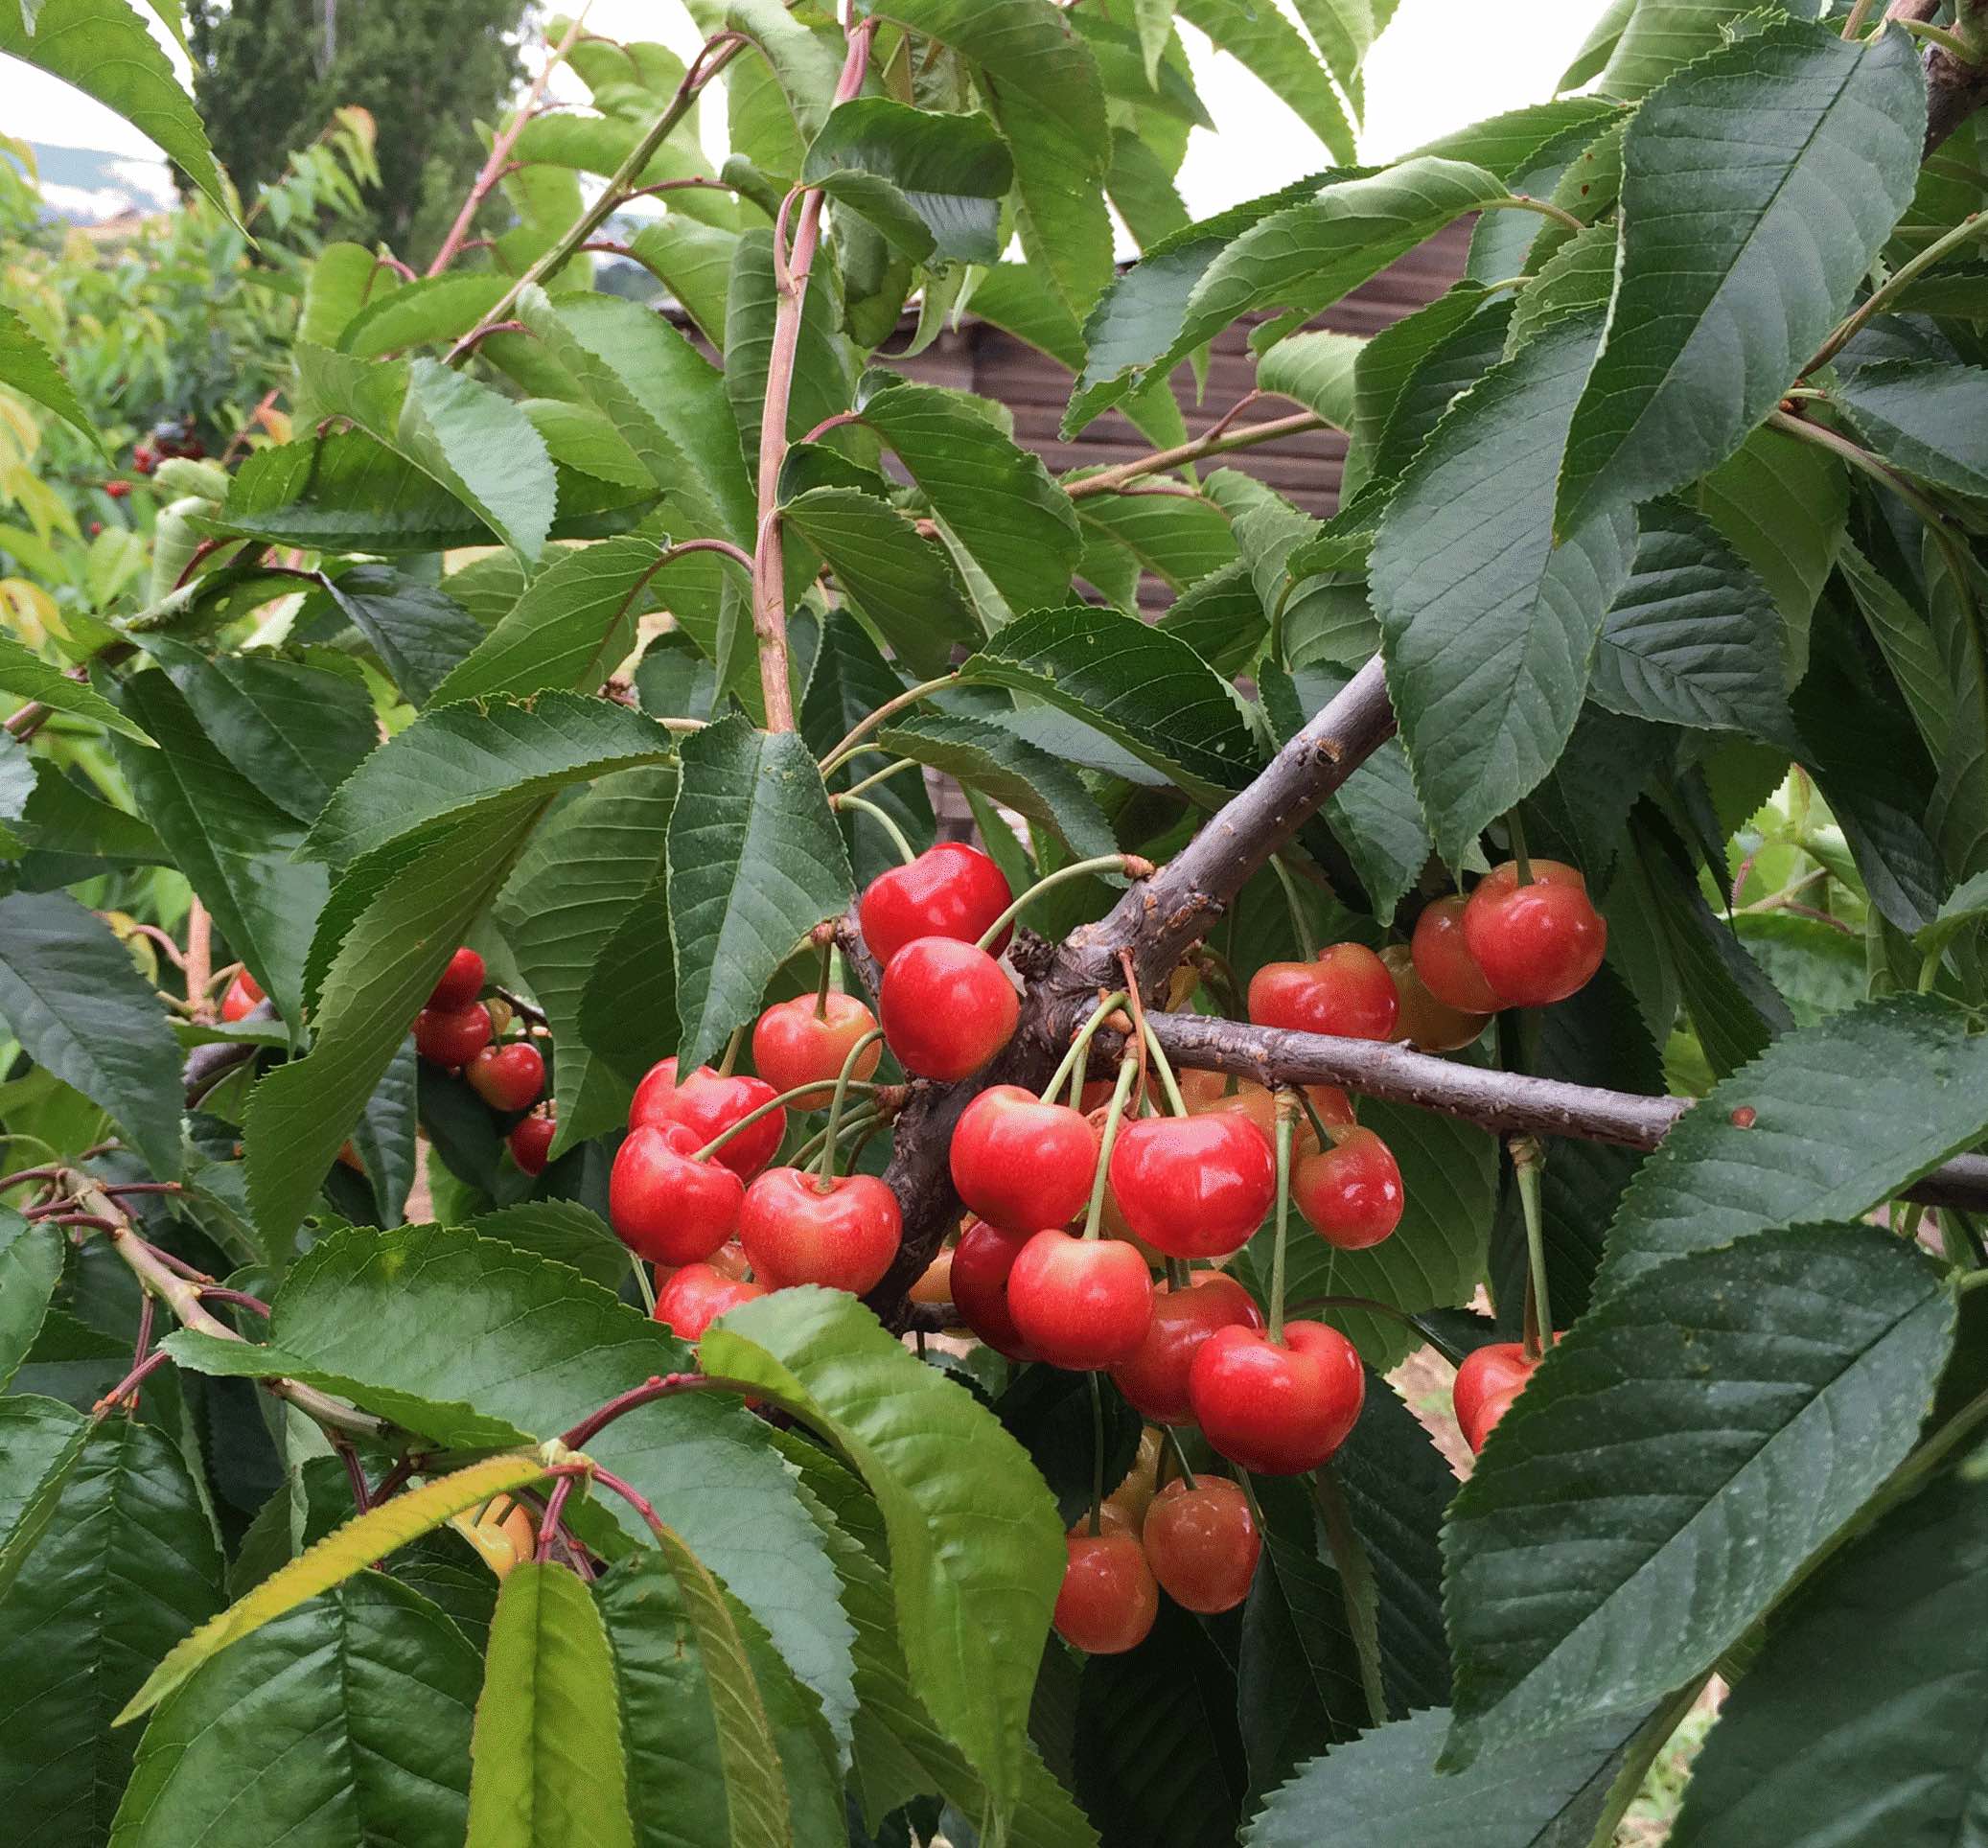 Clump of Cherries on a tree